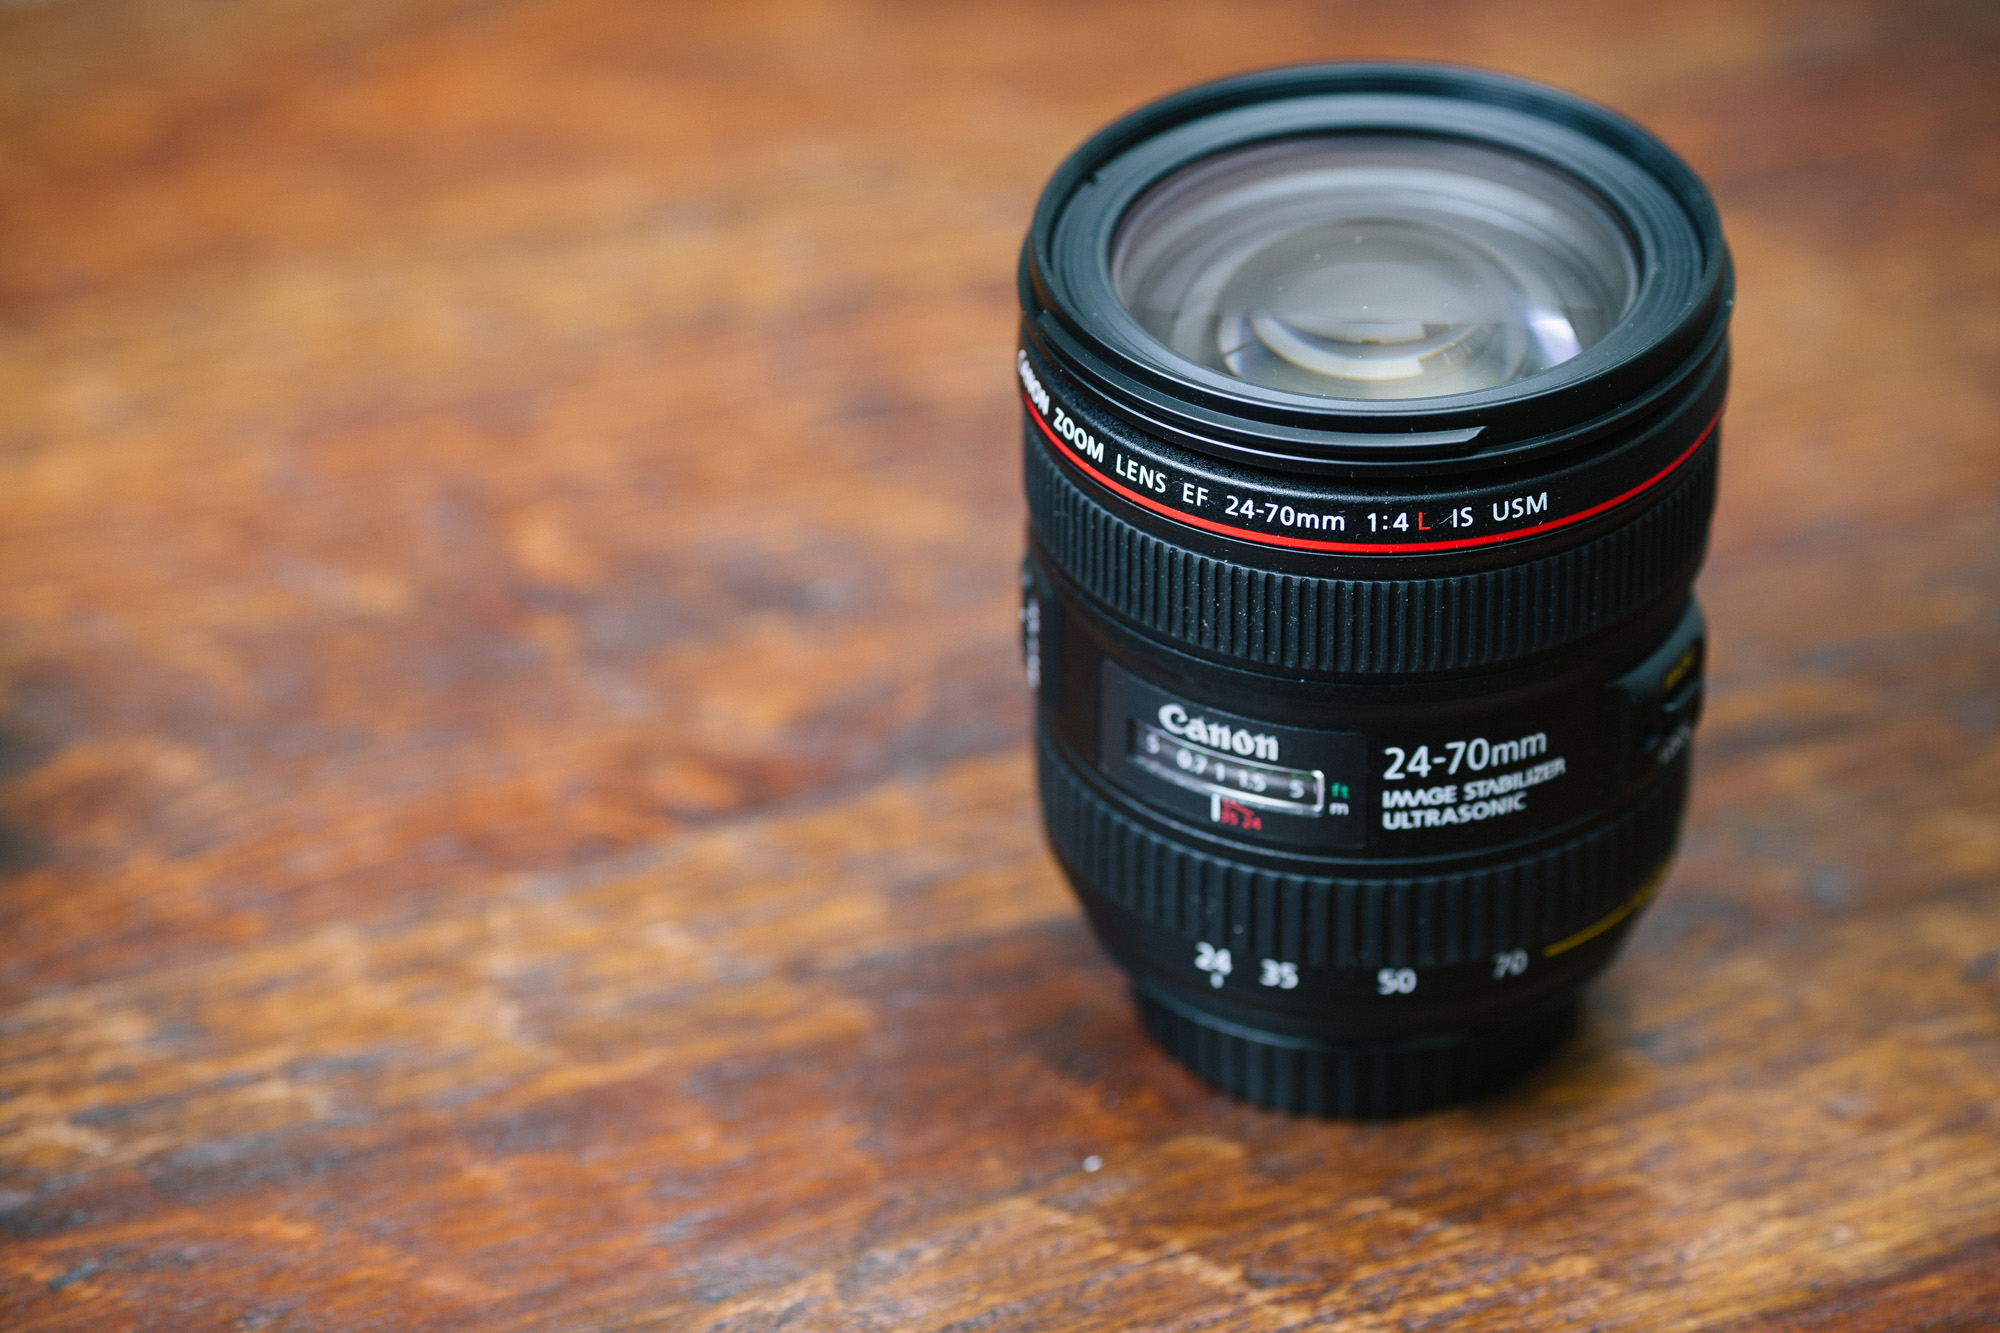 Canon 24-70mm f4L IS